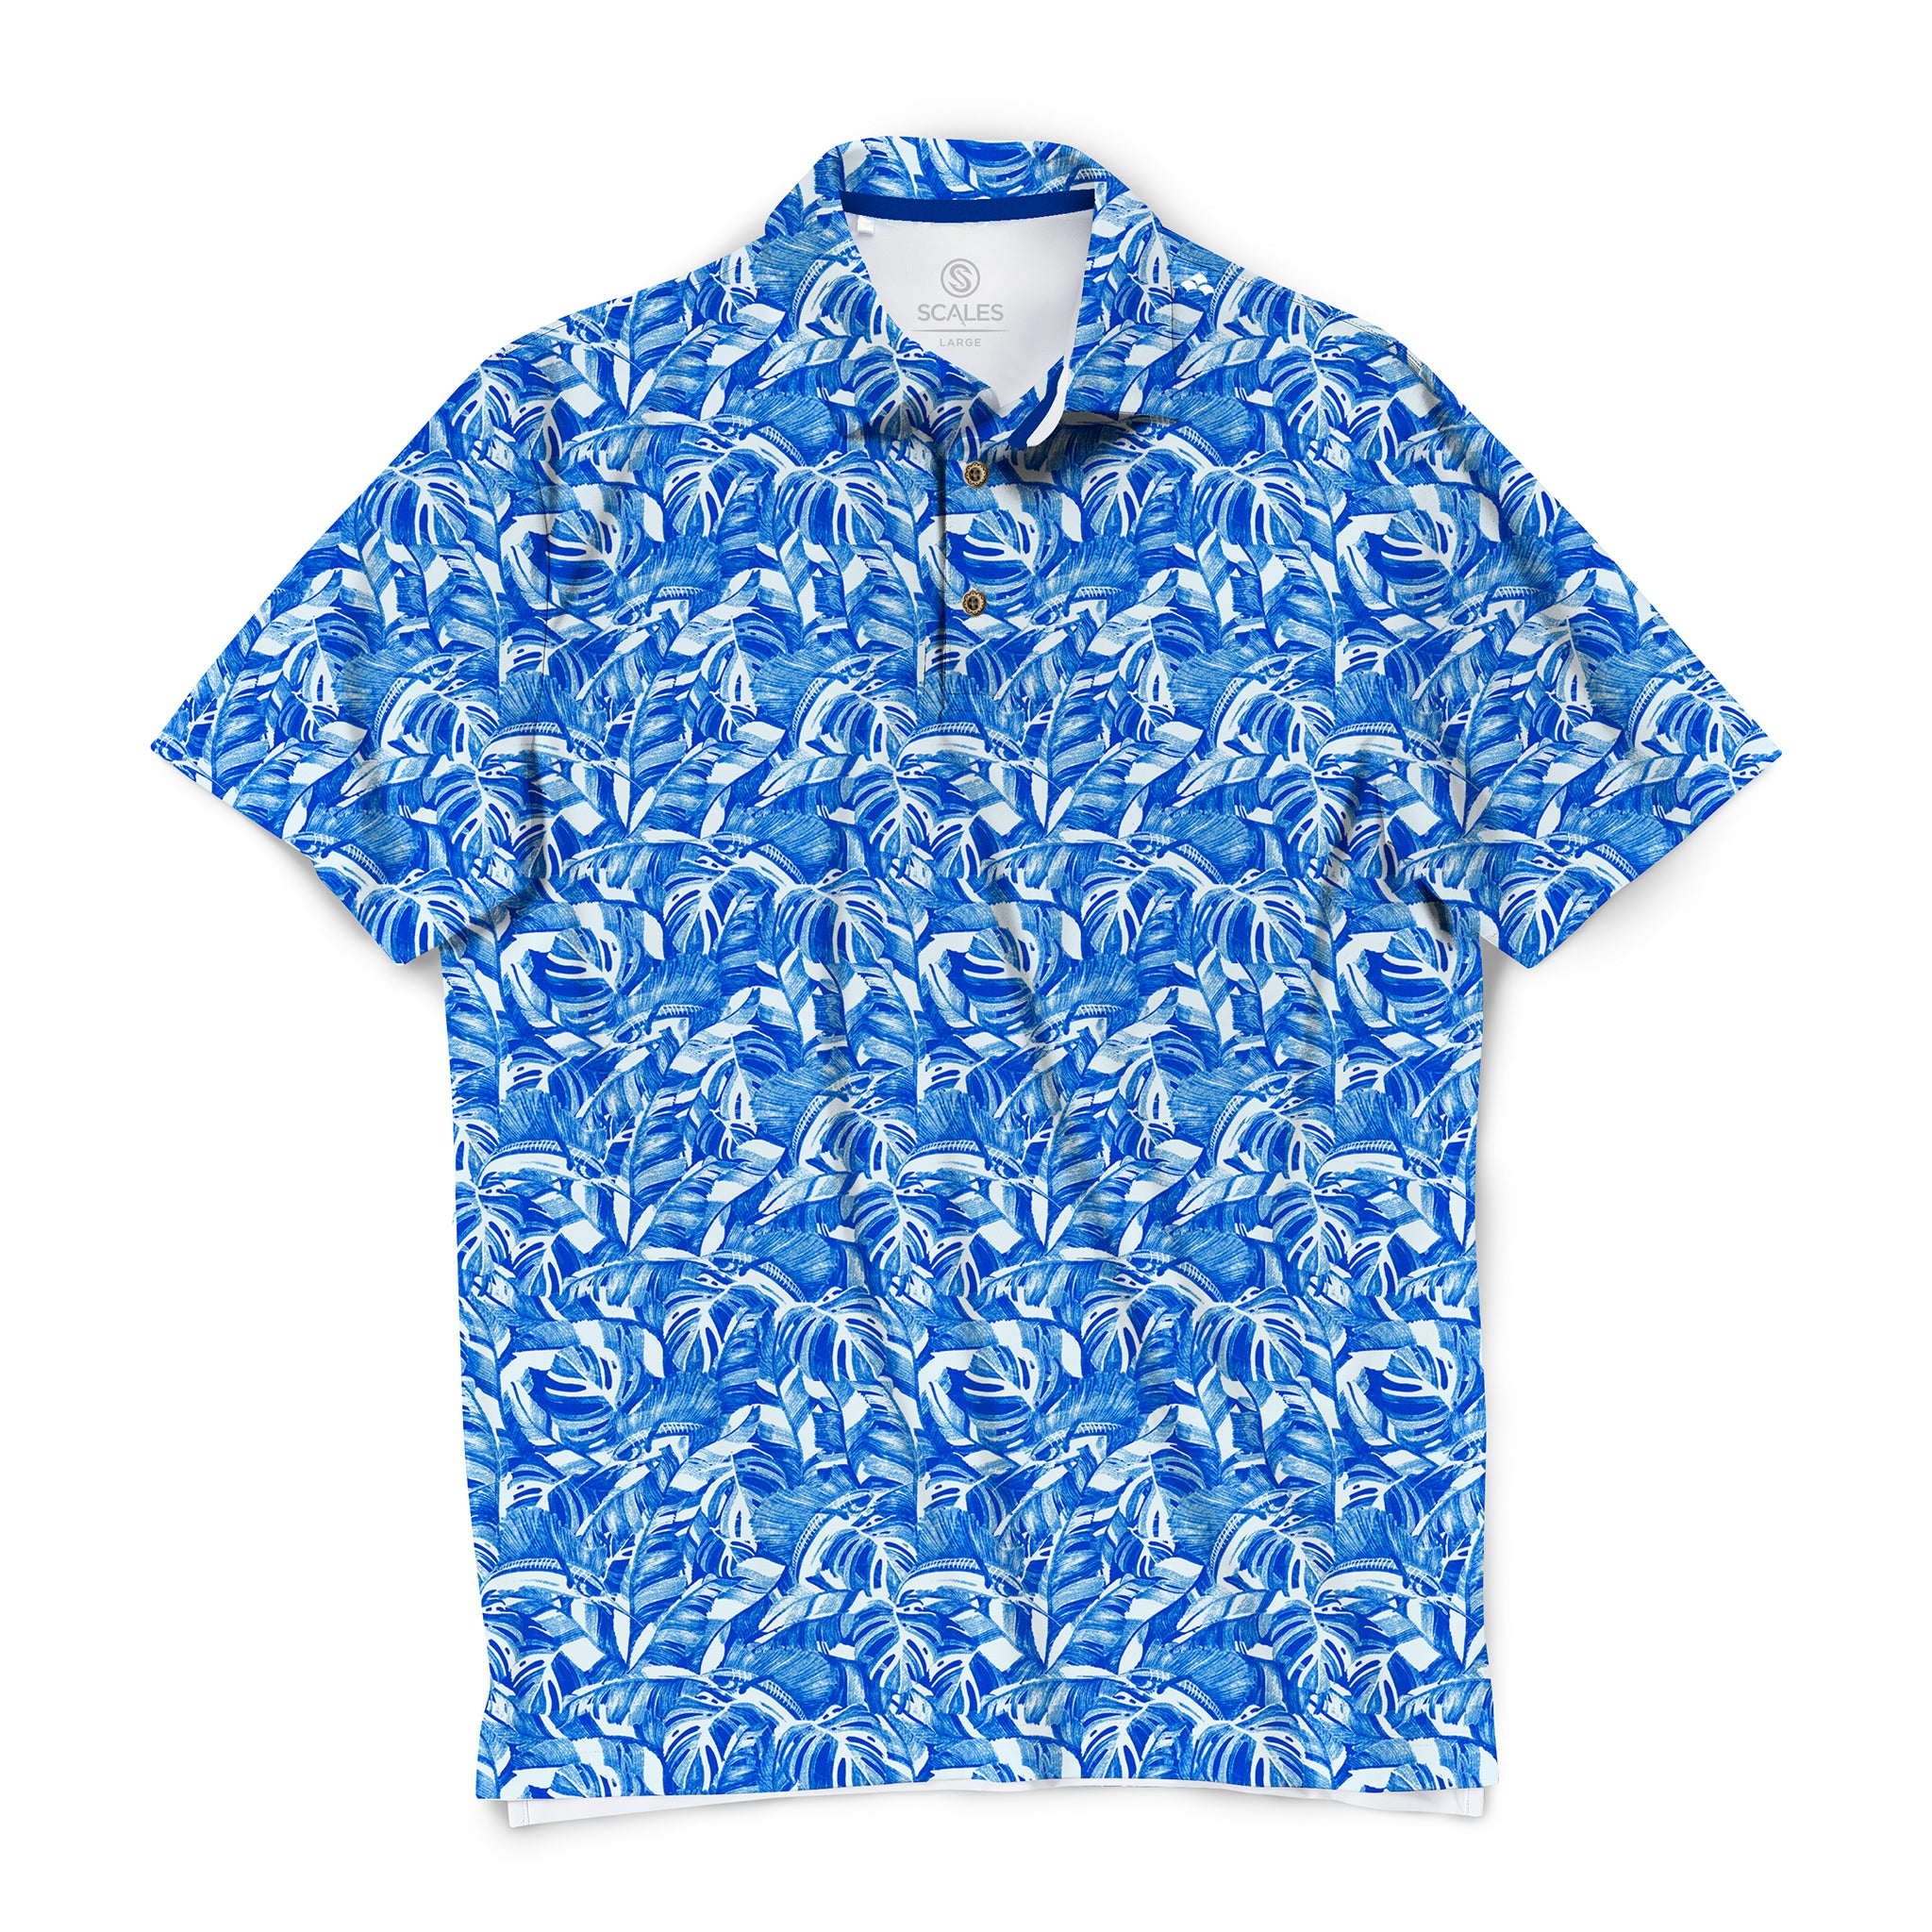 Scales Jungle Sail Polo in Royal Size 3XL